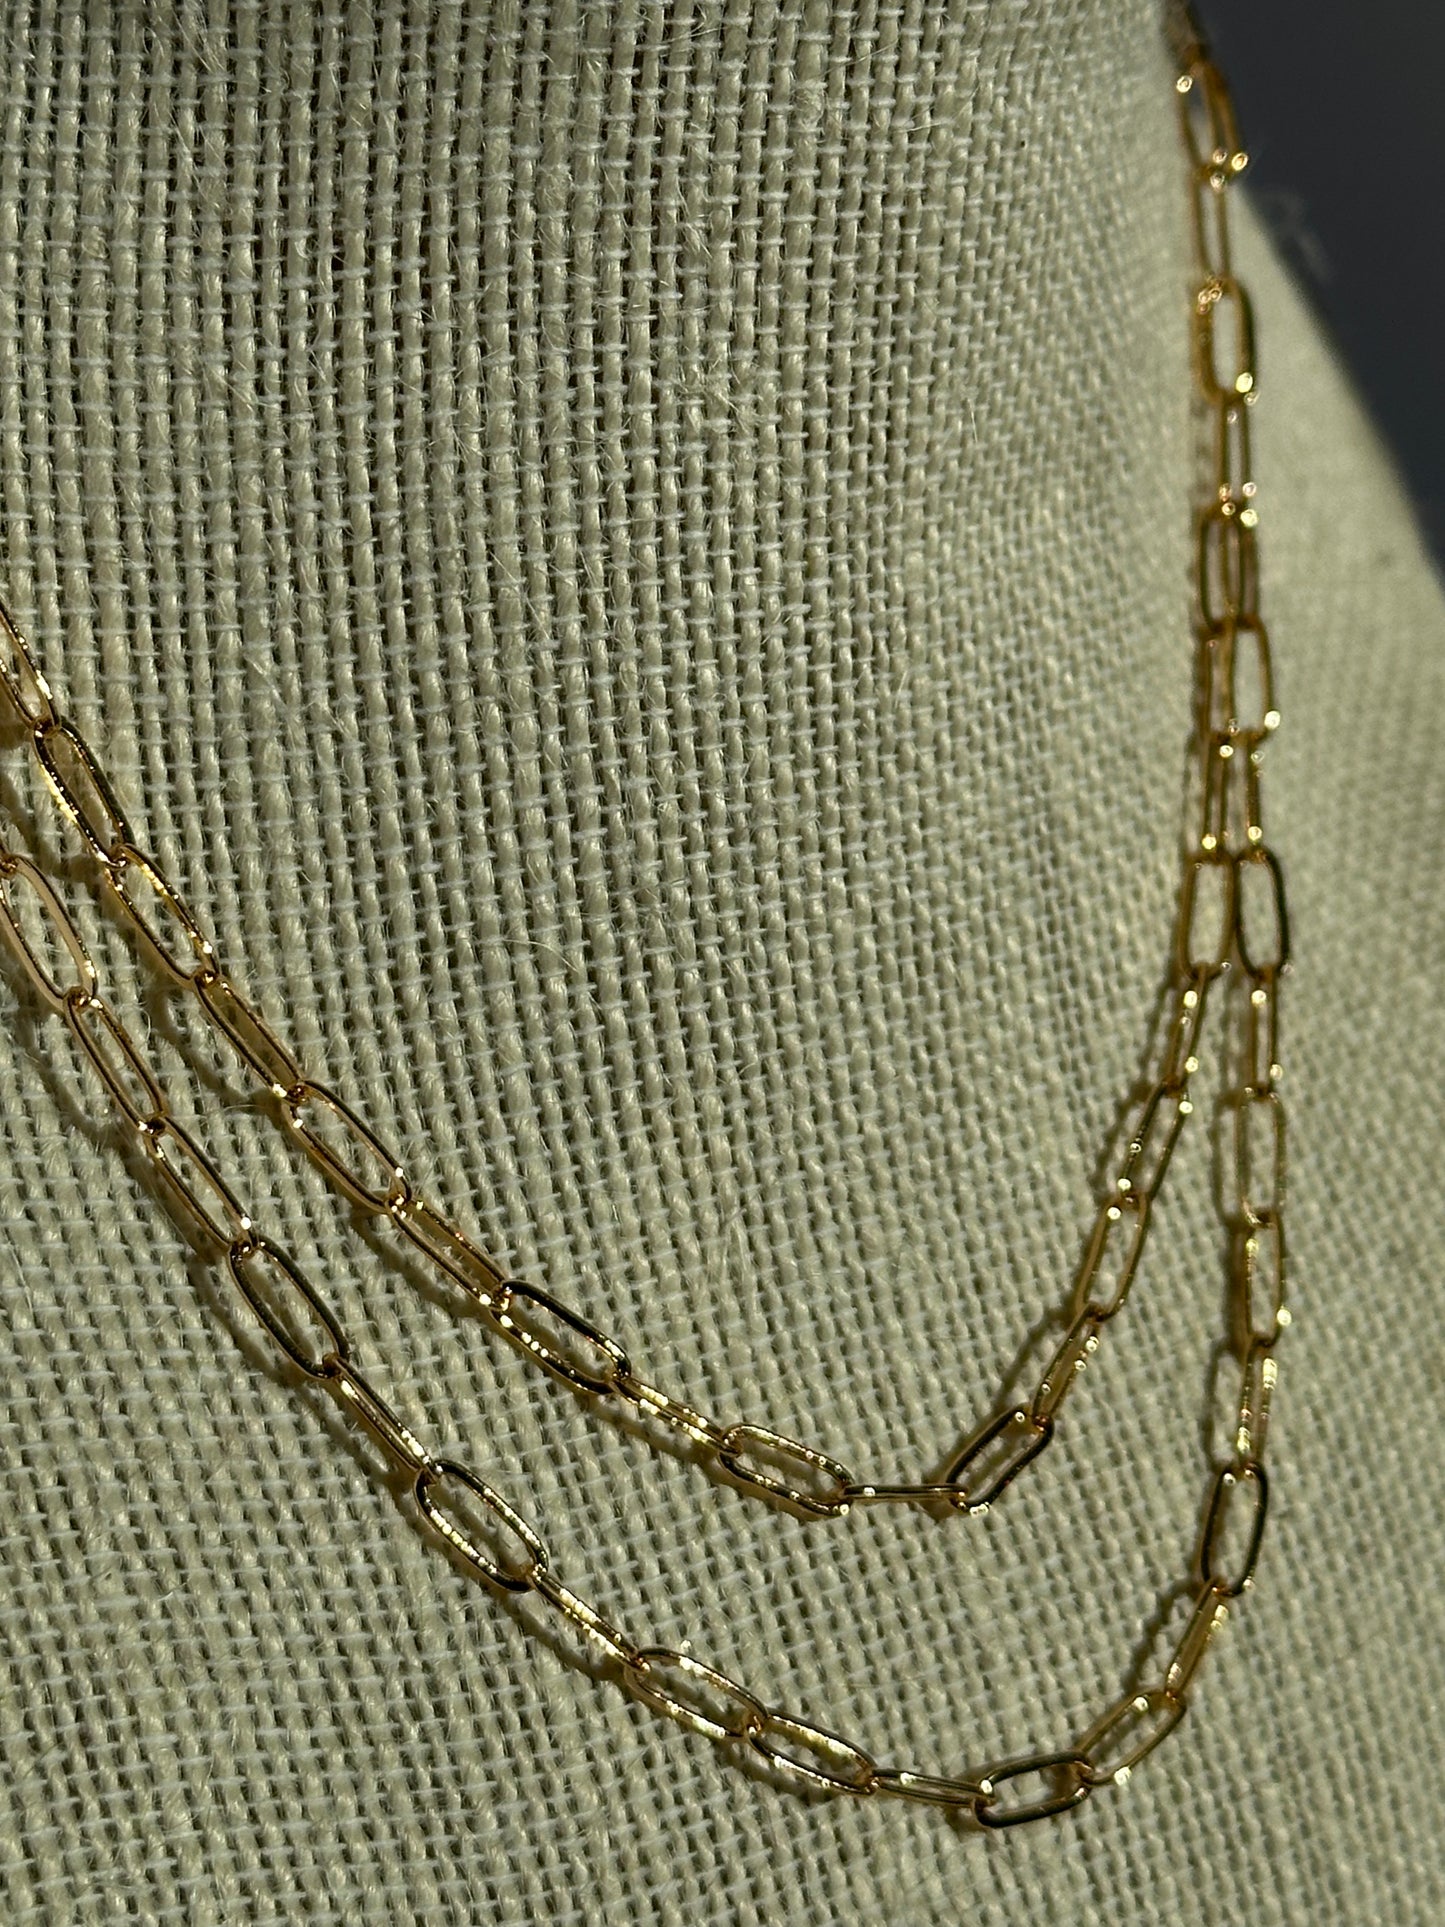 18k Gold-Plated  paper clip necklace